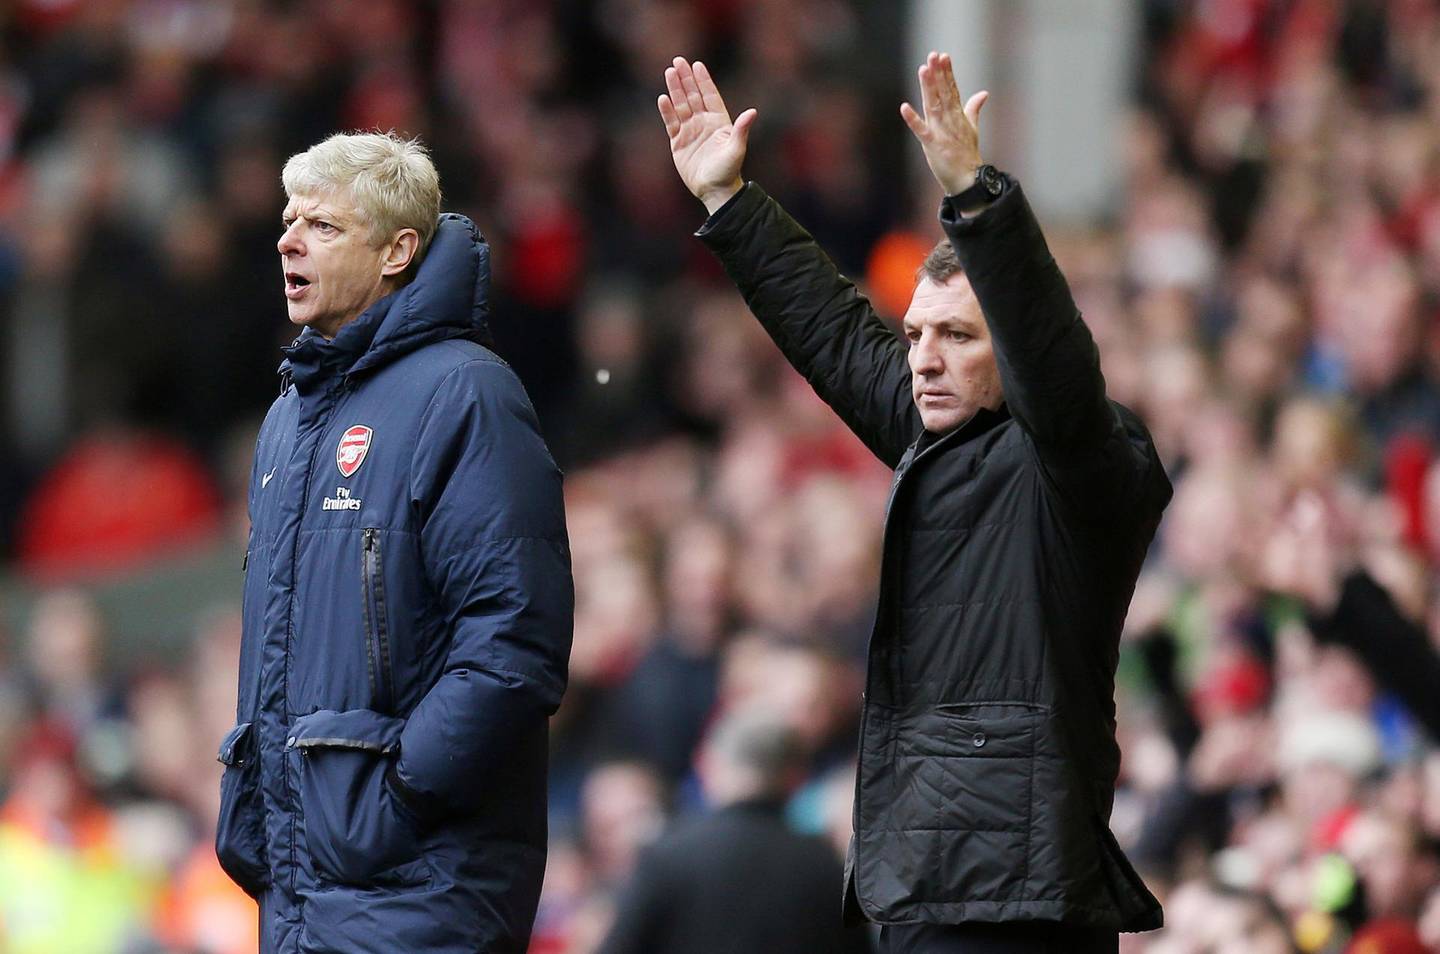 FILE PHOTO: Soccer Football - Liverpool v Arsenal - Barclays Premier League - Anfield - February 8, 2014  Liverpool manager Brendan Rodgers (R) and Arsenal manager Arsene Wenger  Action Images via Reuters/Carl Recine/File Photo  EDITORIAL USE ONLY. No use with unauthorized audio, video, data, fixture lists, club/league logos or live services. Online in-match use limited to 45 images, no video emulation. No use in betting, games or single club/league/player publications.  Please contact your account representative for further details.